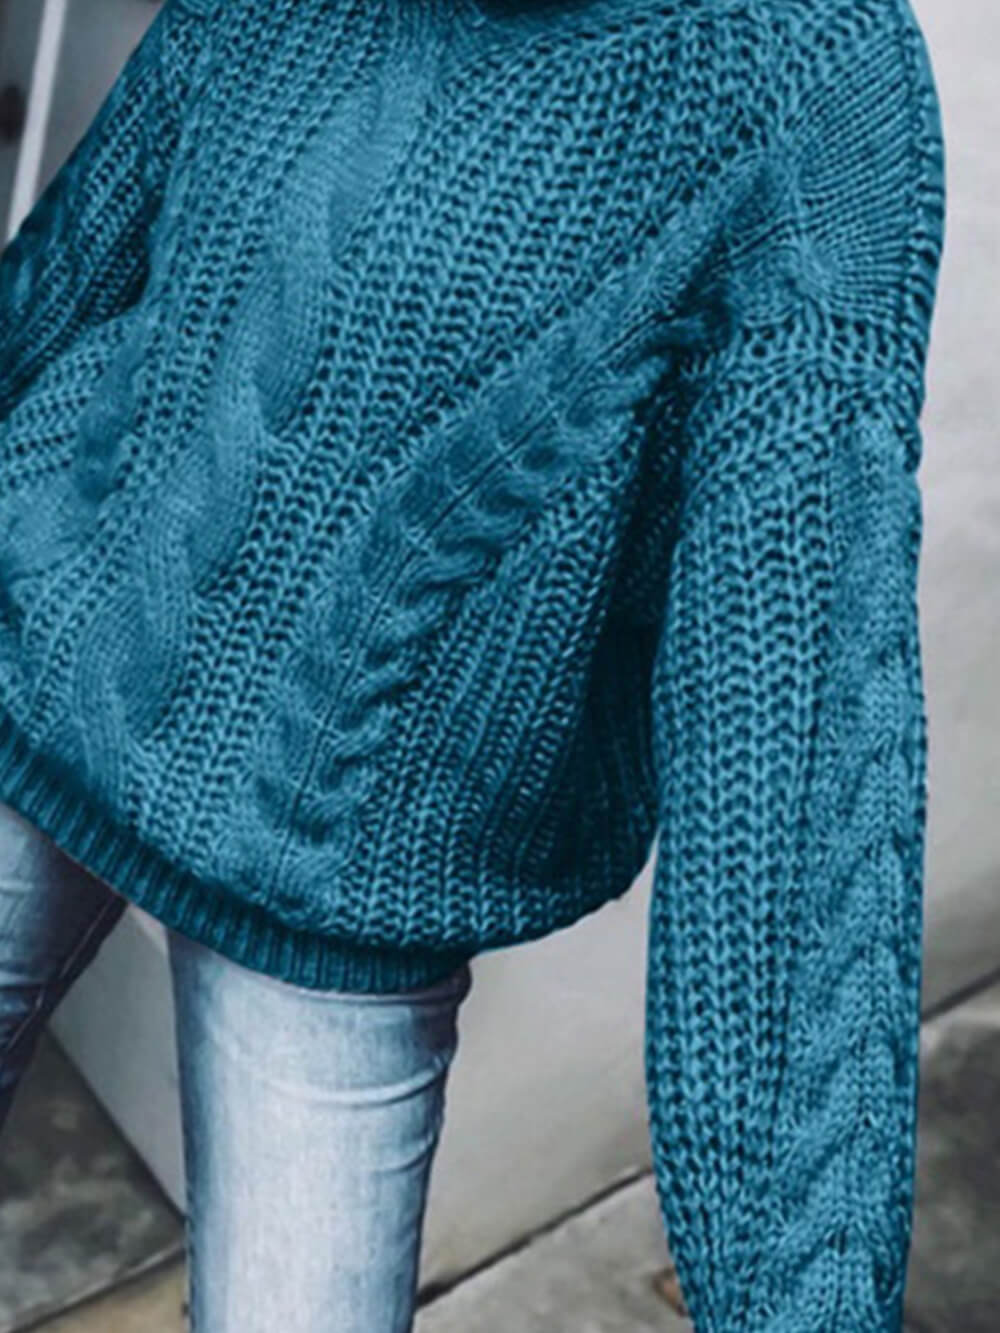 Turtleneck Knitted Sweater